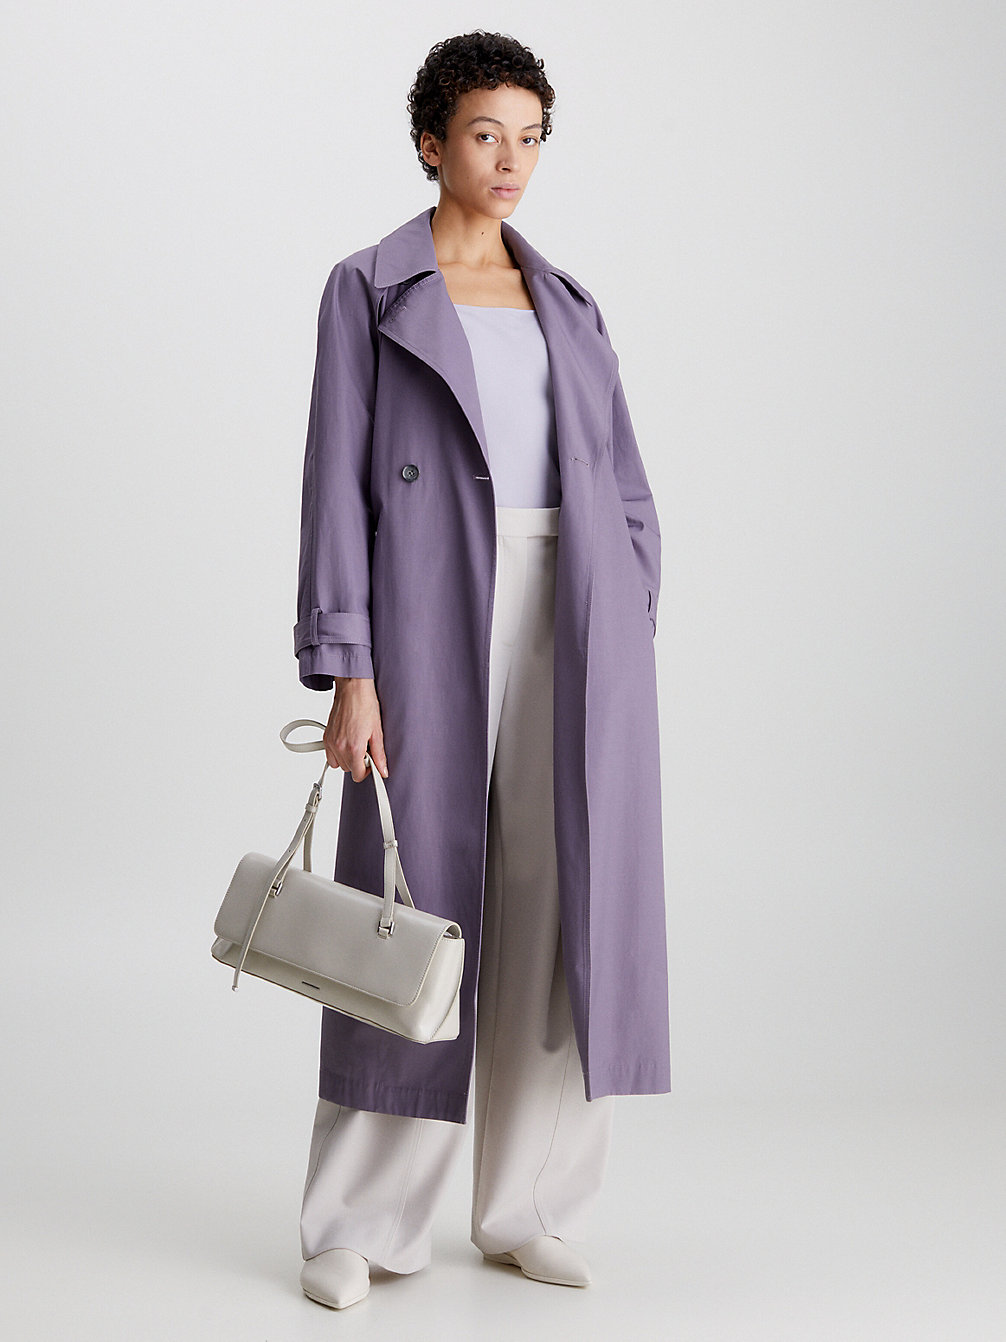 PURPLE CALLA Oversized Cut Out Trench Coat undefined women Calvin Klein